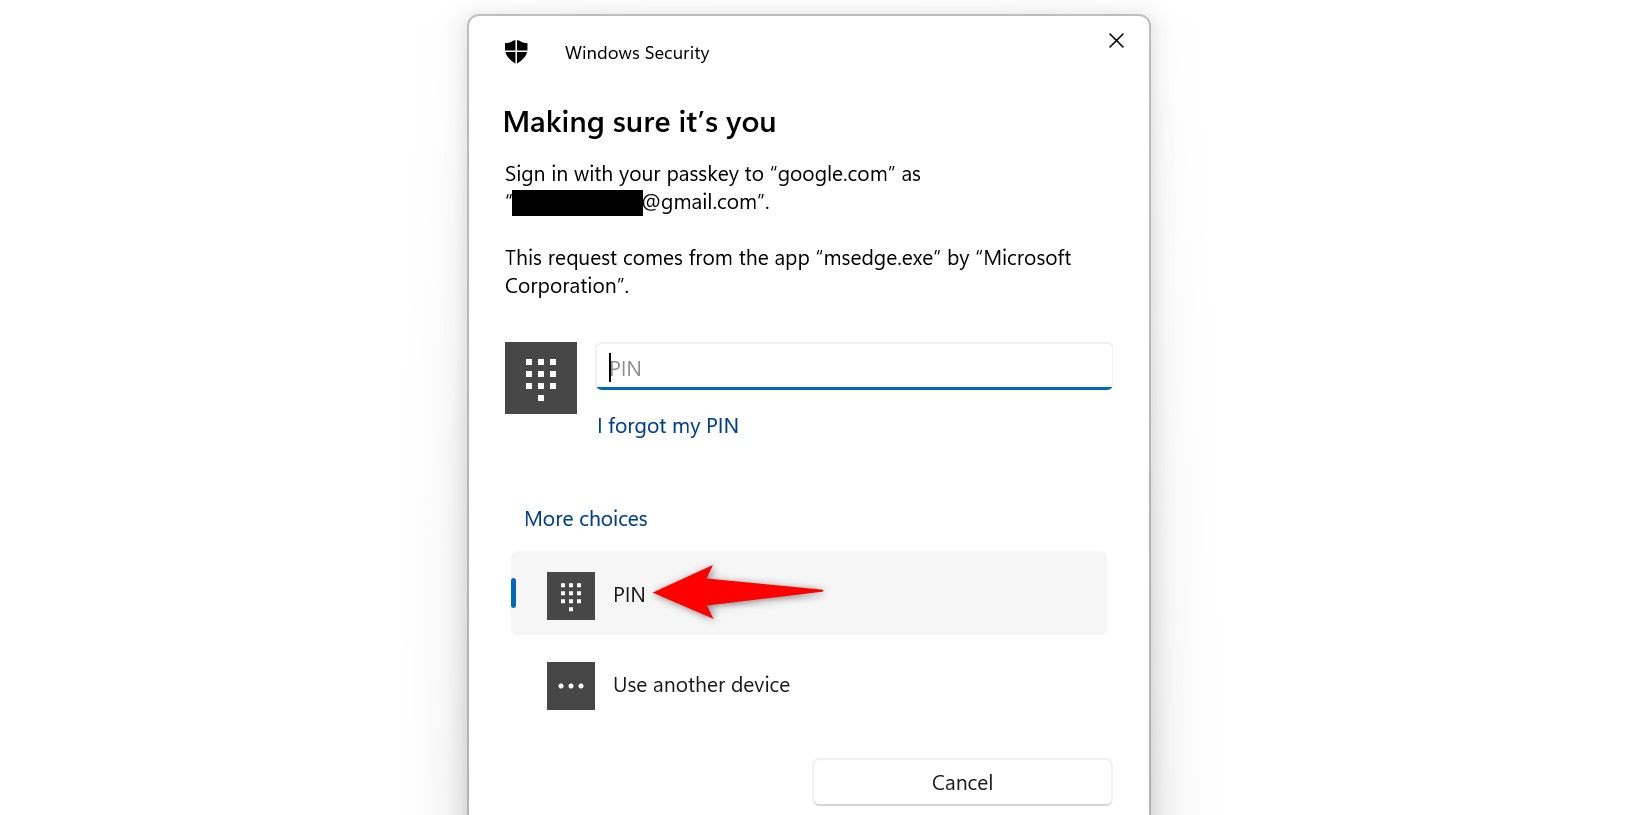 A 'Windows Security' prompt for signing in to Google with a passkey.